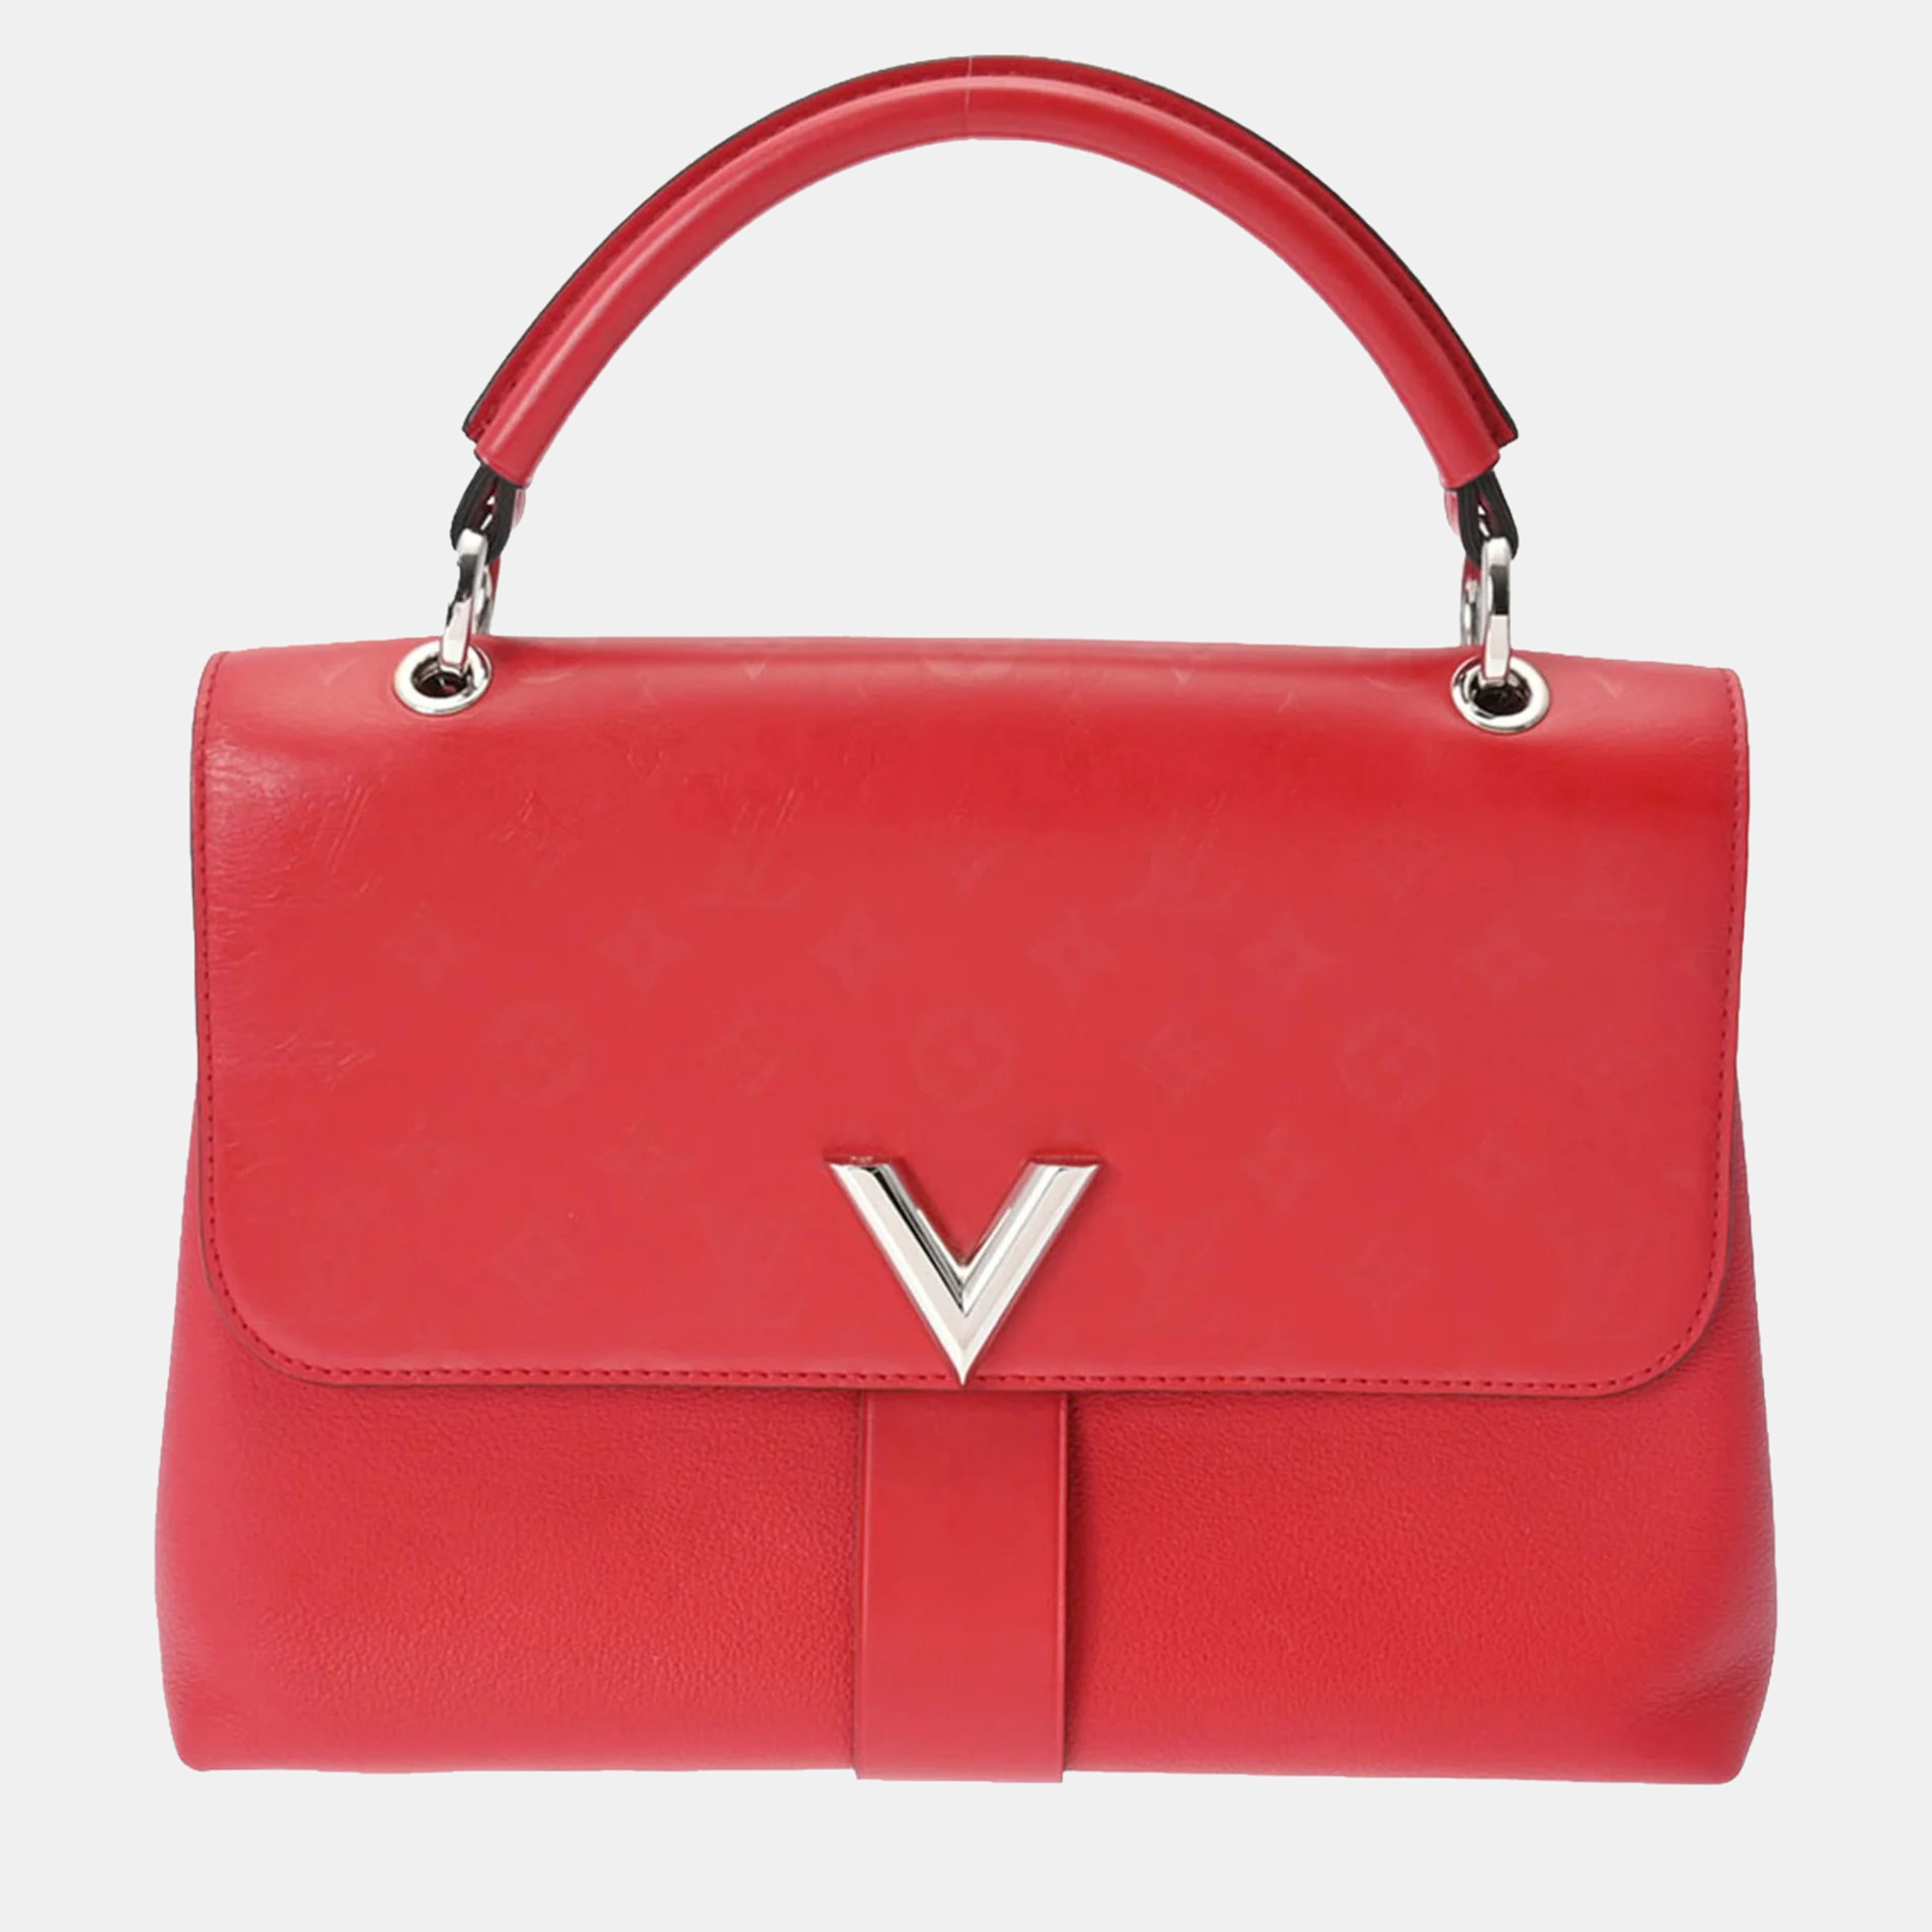 Louis vuitton red leather monogram very one top handle bag